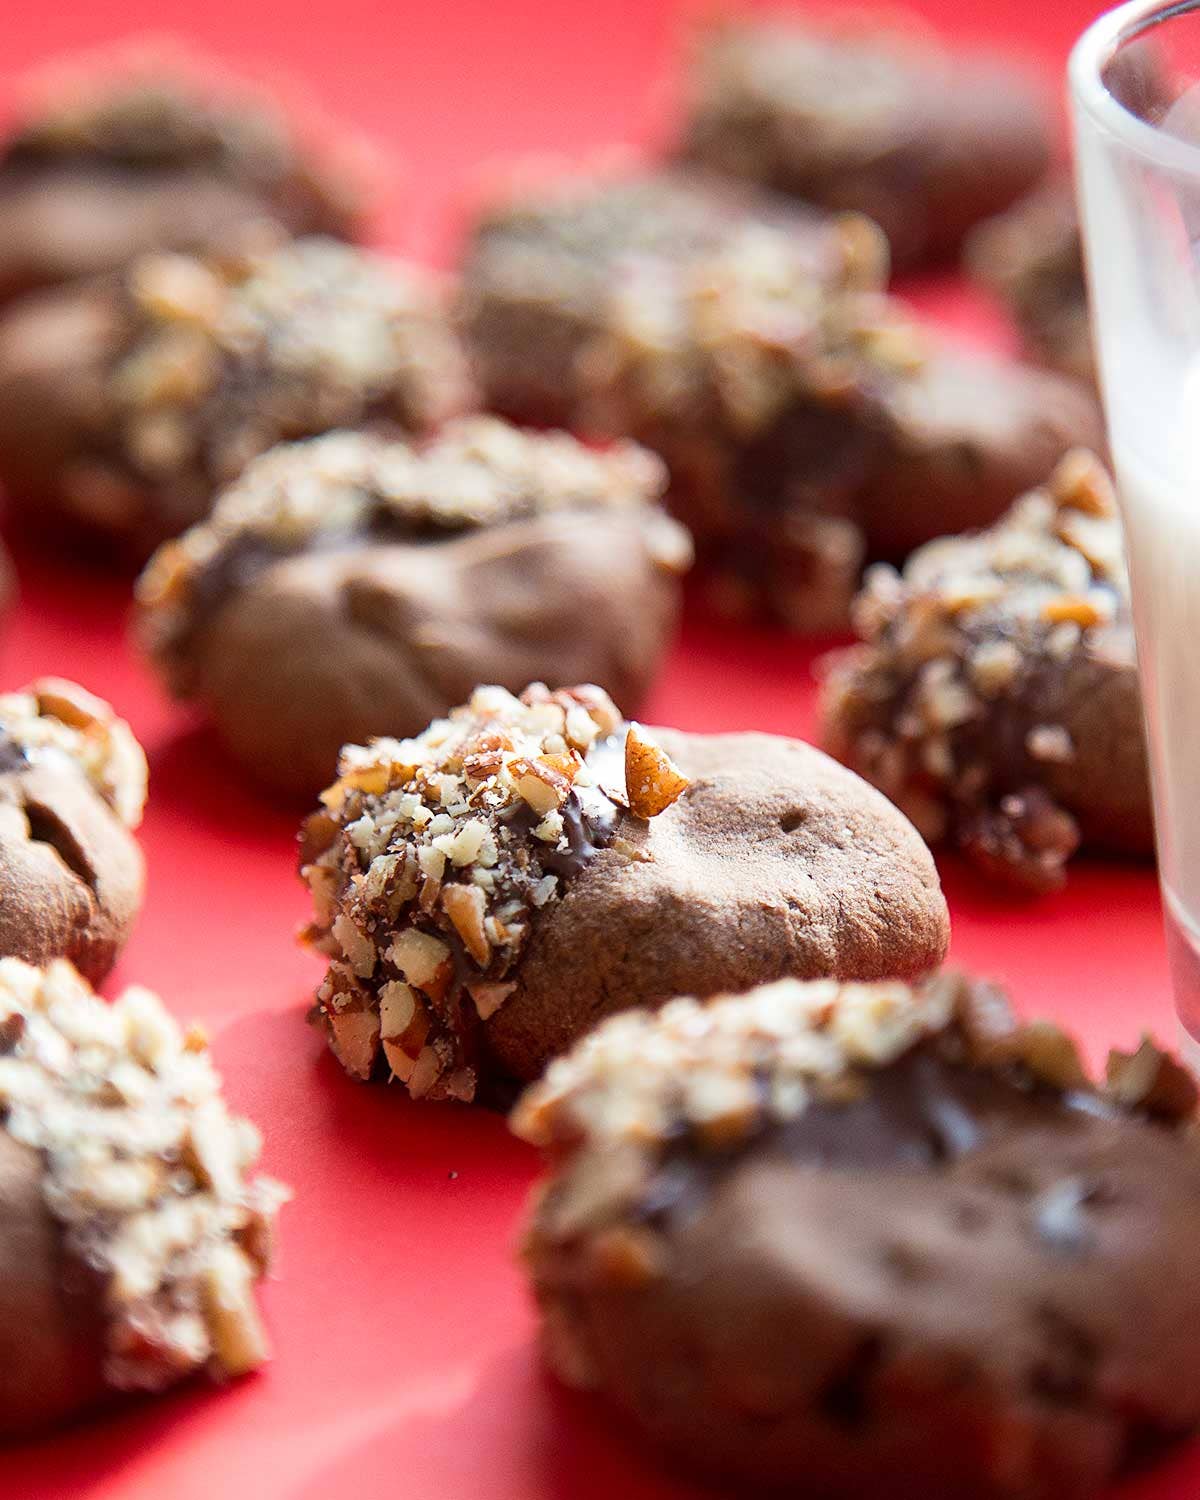 Dusty Bliss Chocolate-Espresso Cookies